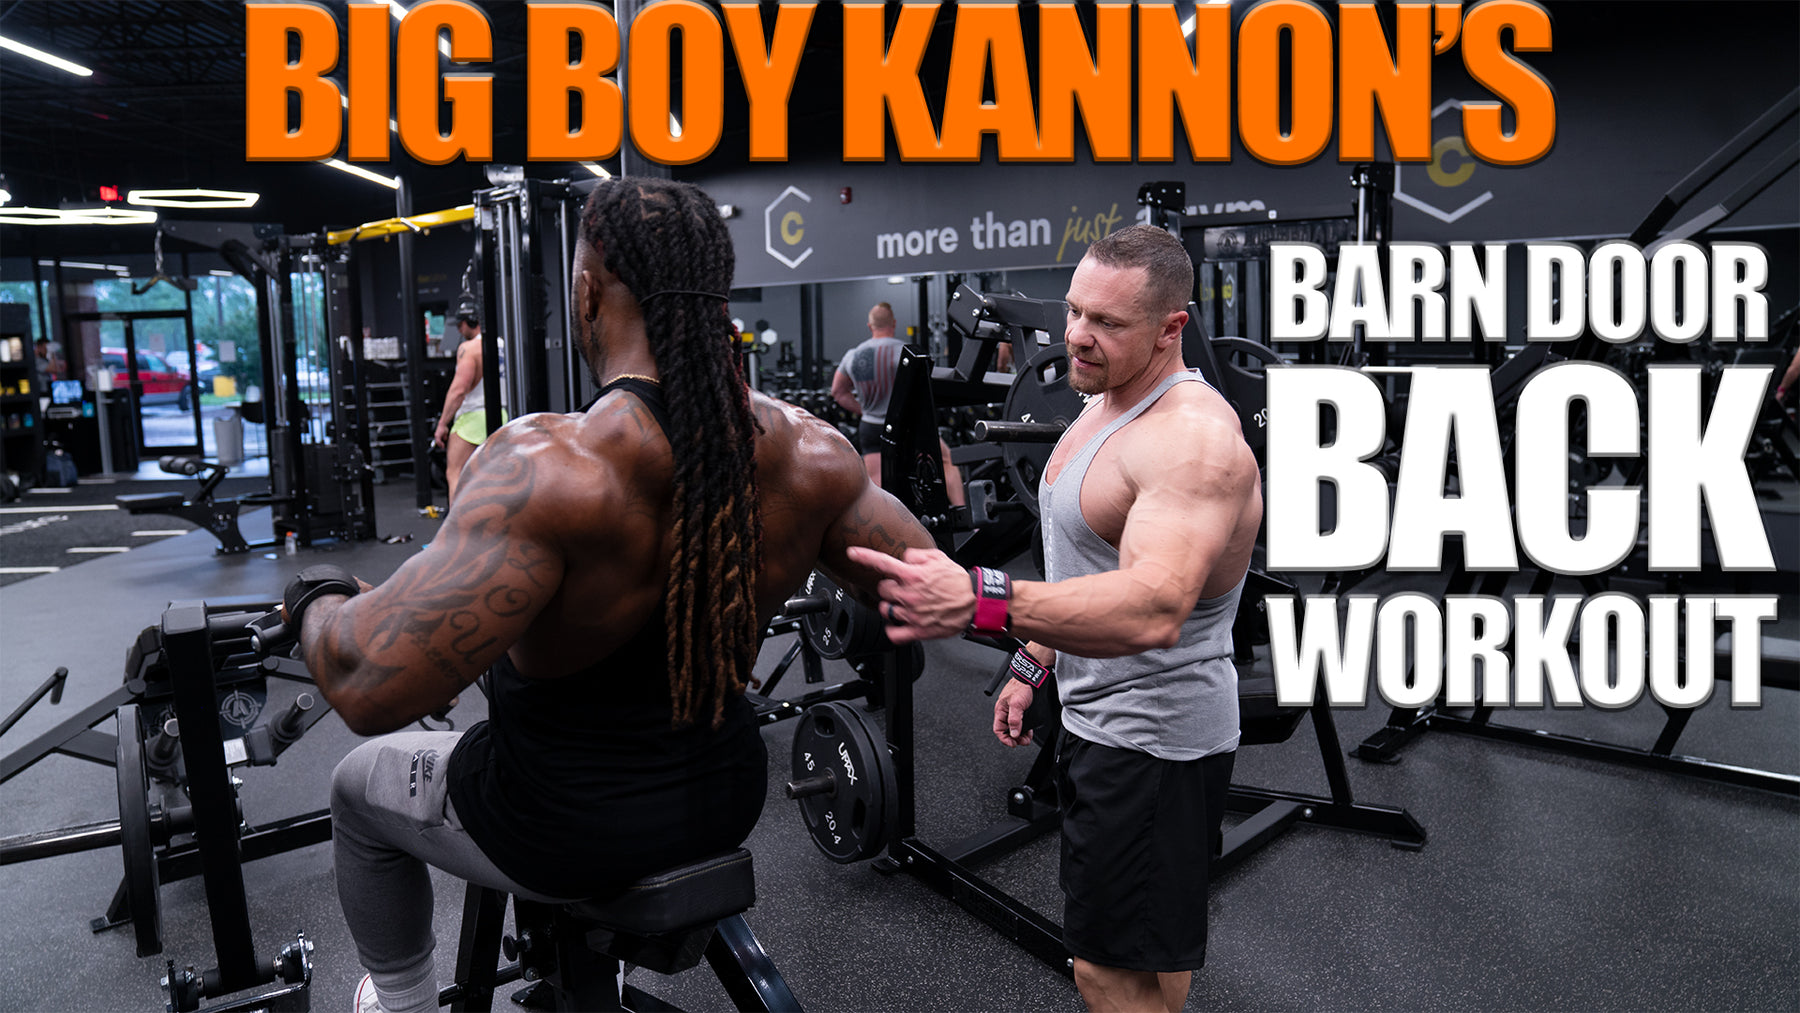 Barn Door Back Workout with Big Boy Kannon